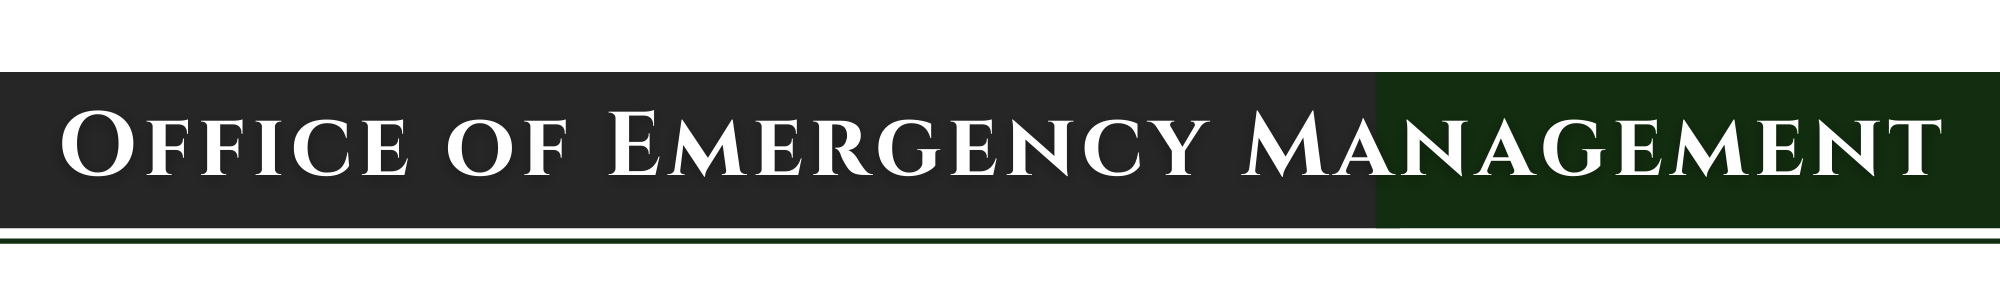 Office of Emergency Management